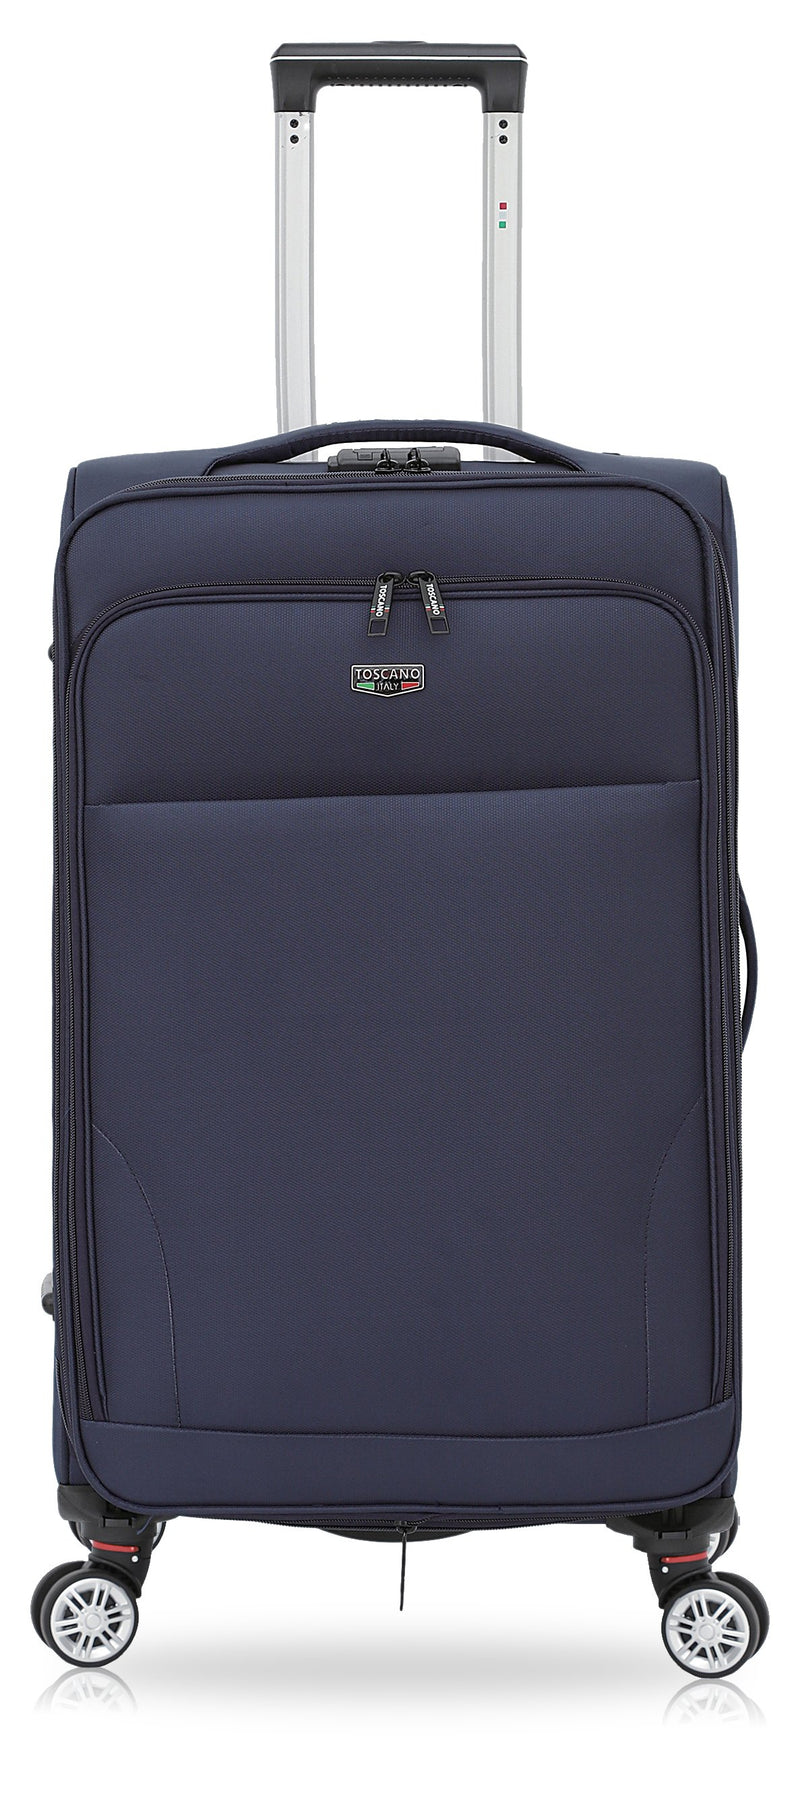 TOSCANO 23-inch Ricerca Lightweight Carry On  Luggage Suitcase